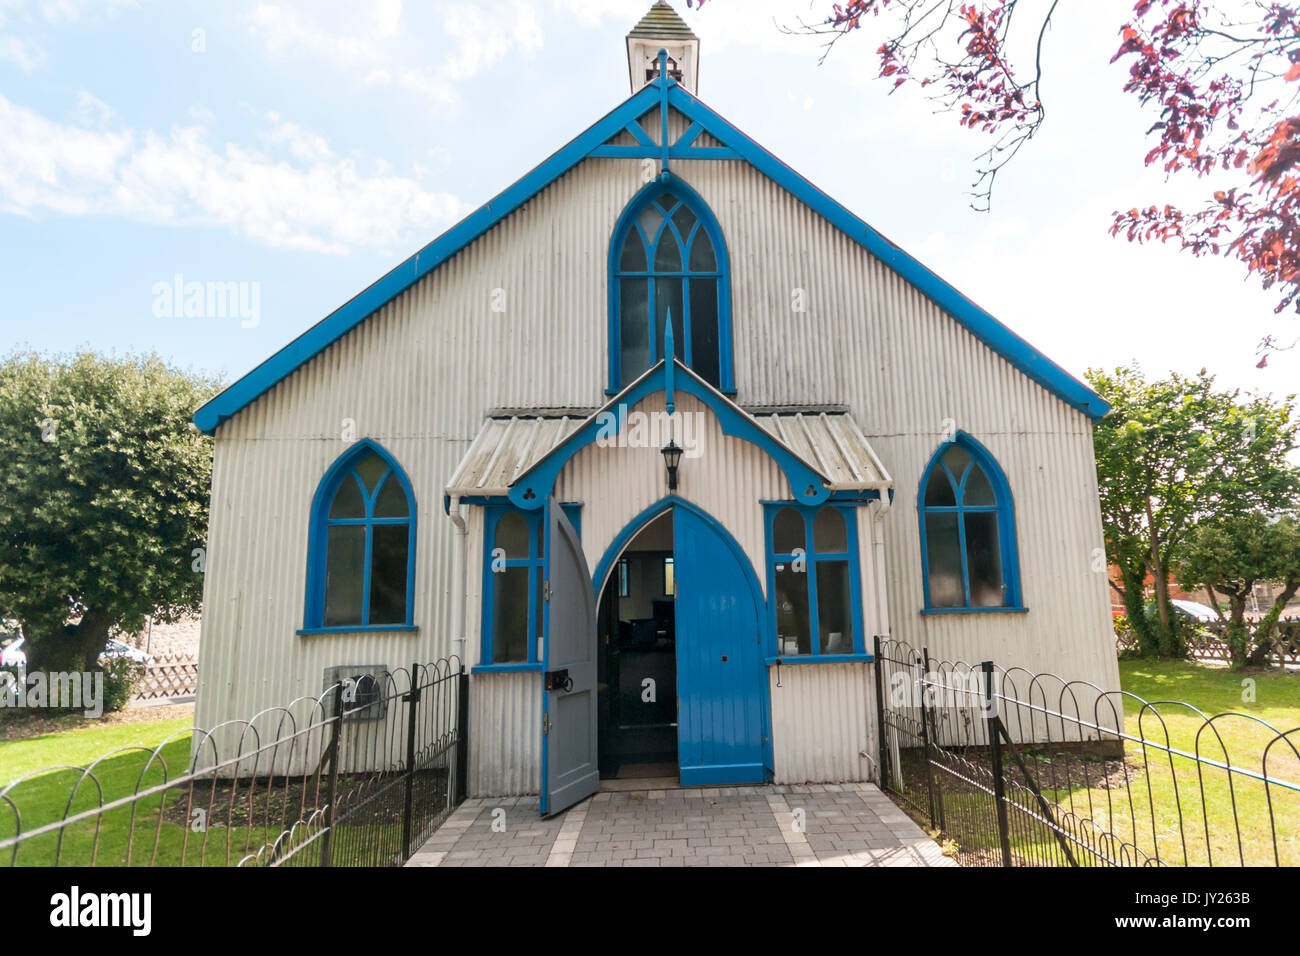 The church of St Michael’s and All Angels Tin Tabernacle in Hythe, Kent Stock Photo